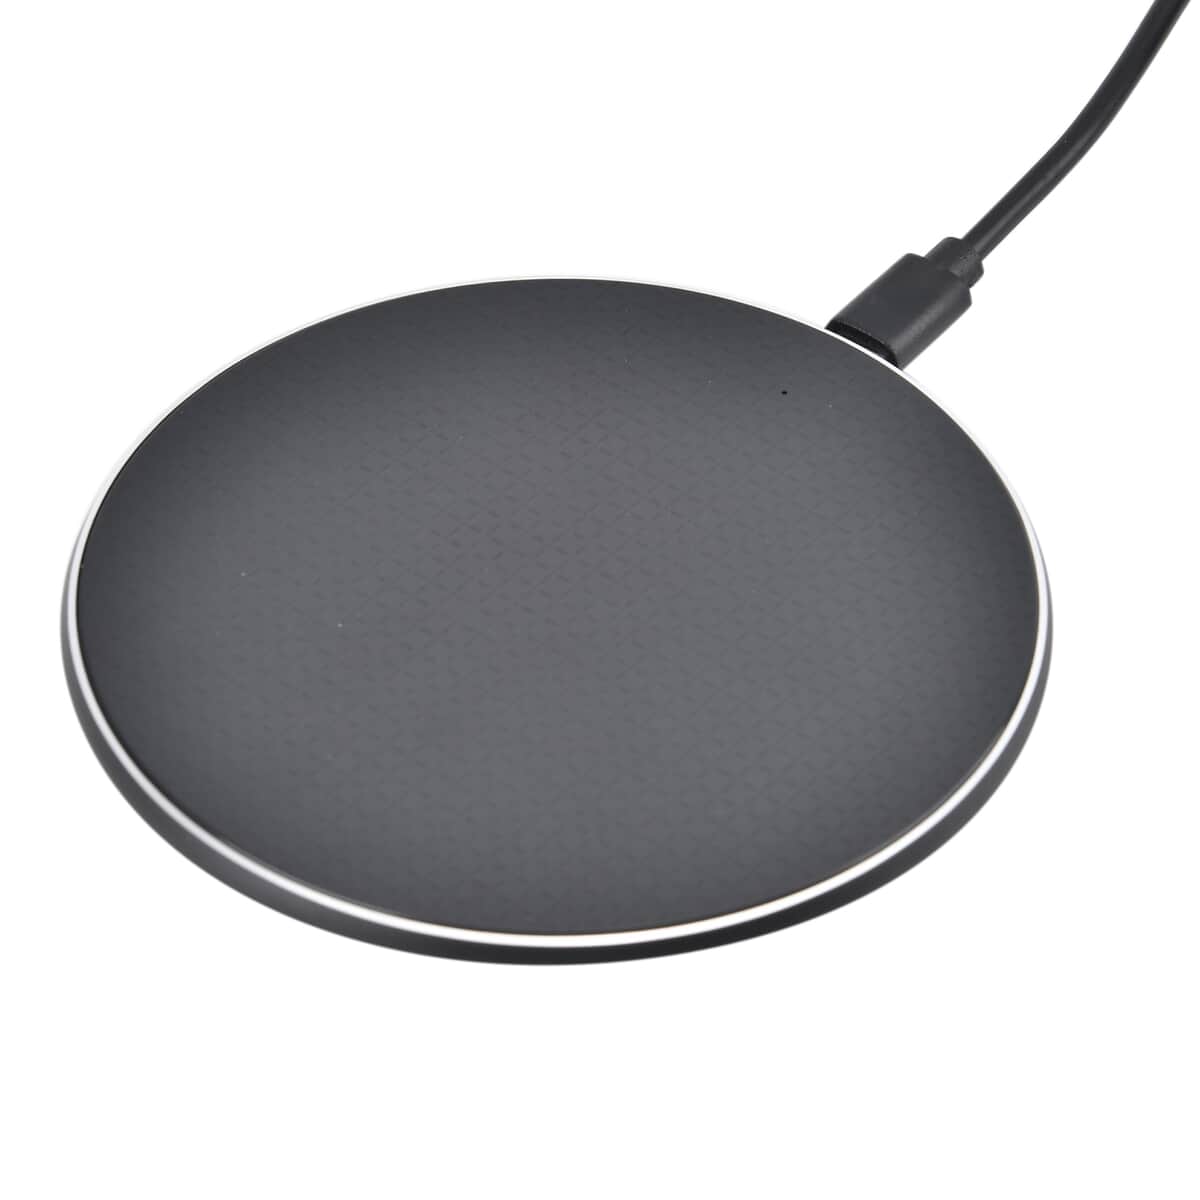 Homesmart 15W Wireless Fast Charger with 3.28 Feet USB Cable - Black, Portable Ultra Thin Fast Charging Pad With Indicator Lights image number 4